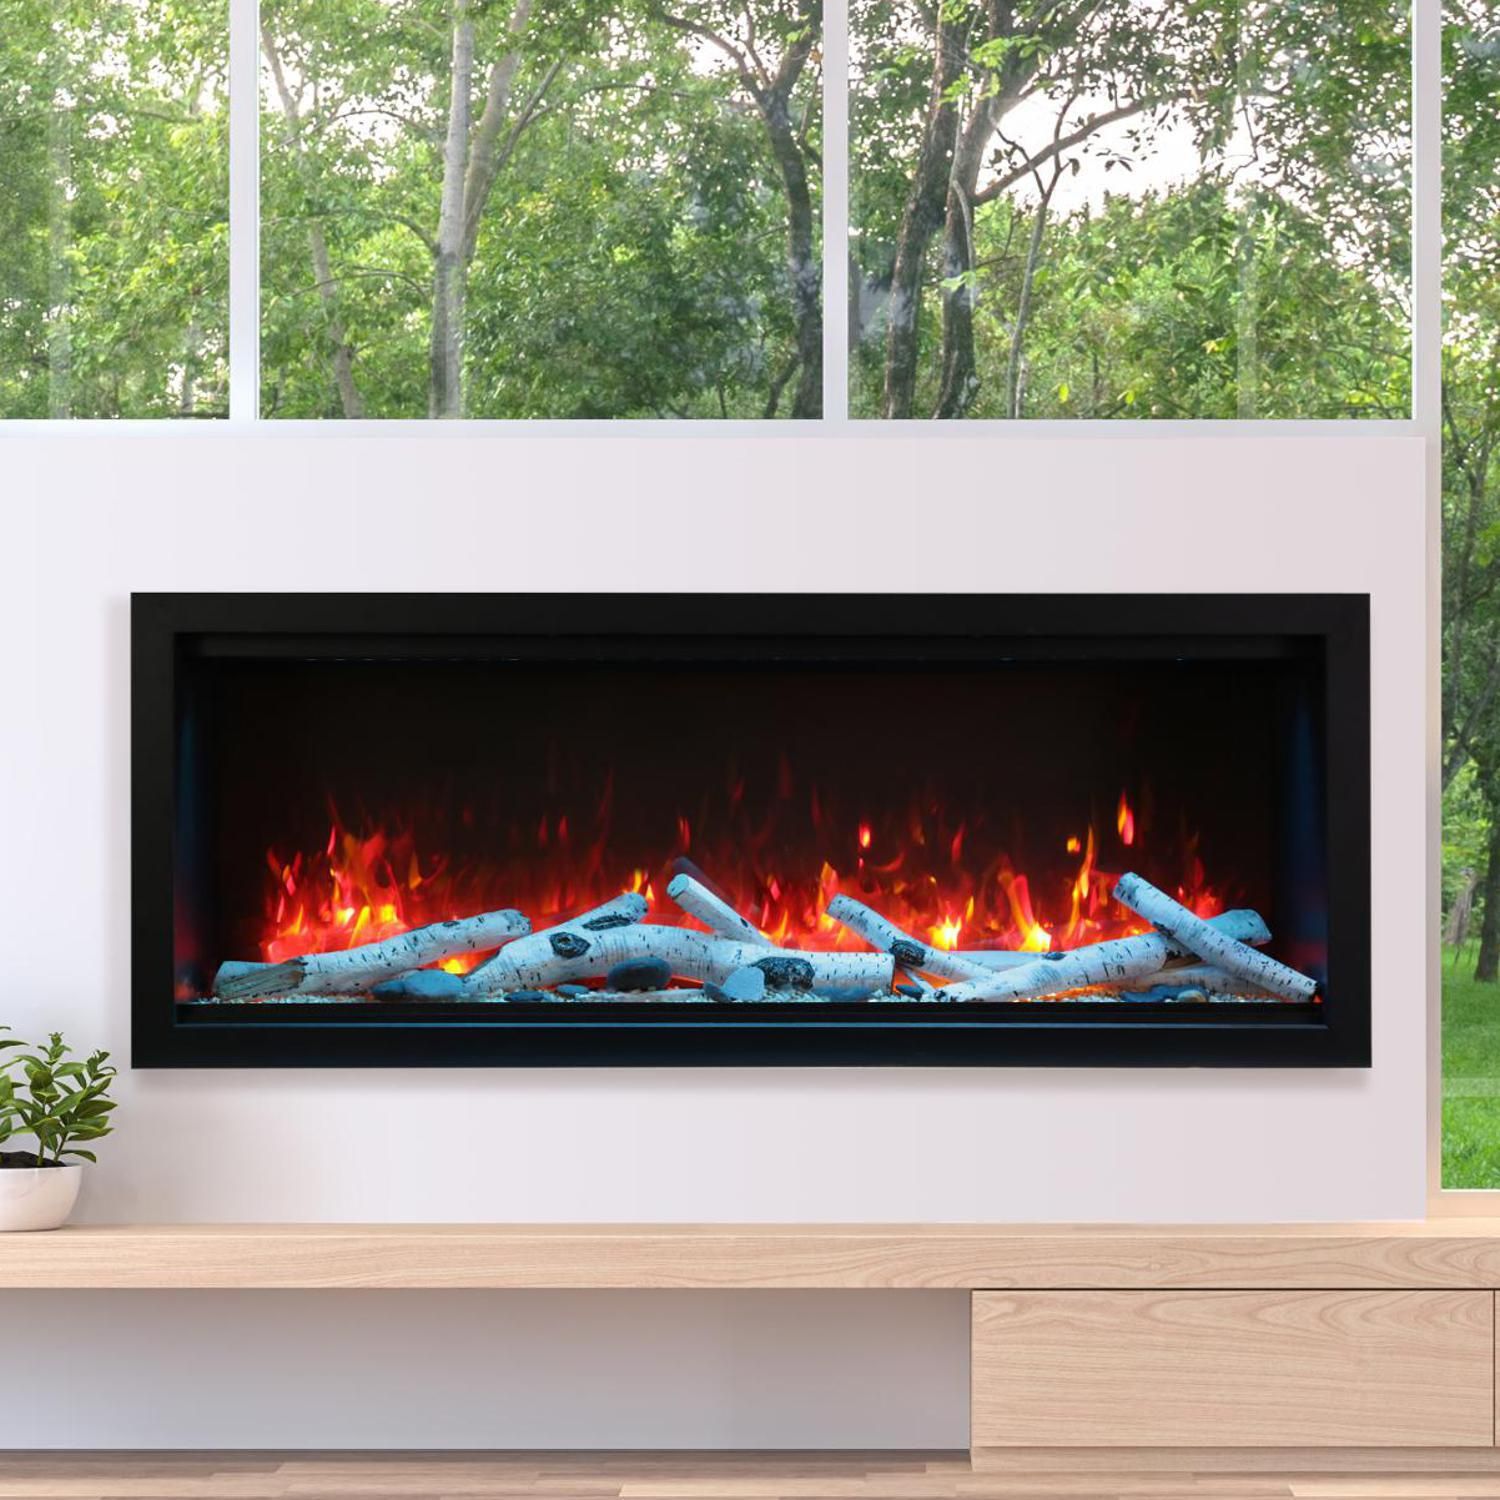 Wall Recessed Electric Fireplace New Amantii Symmetry Series Extra Tall 60" Built In Electric